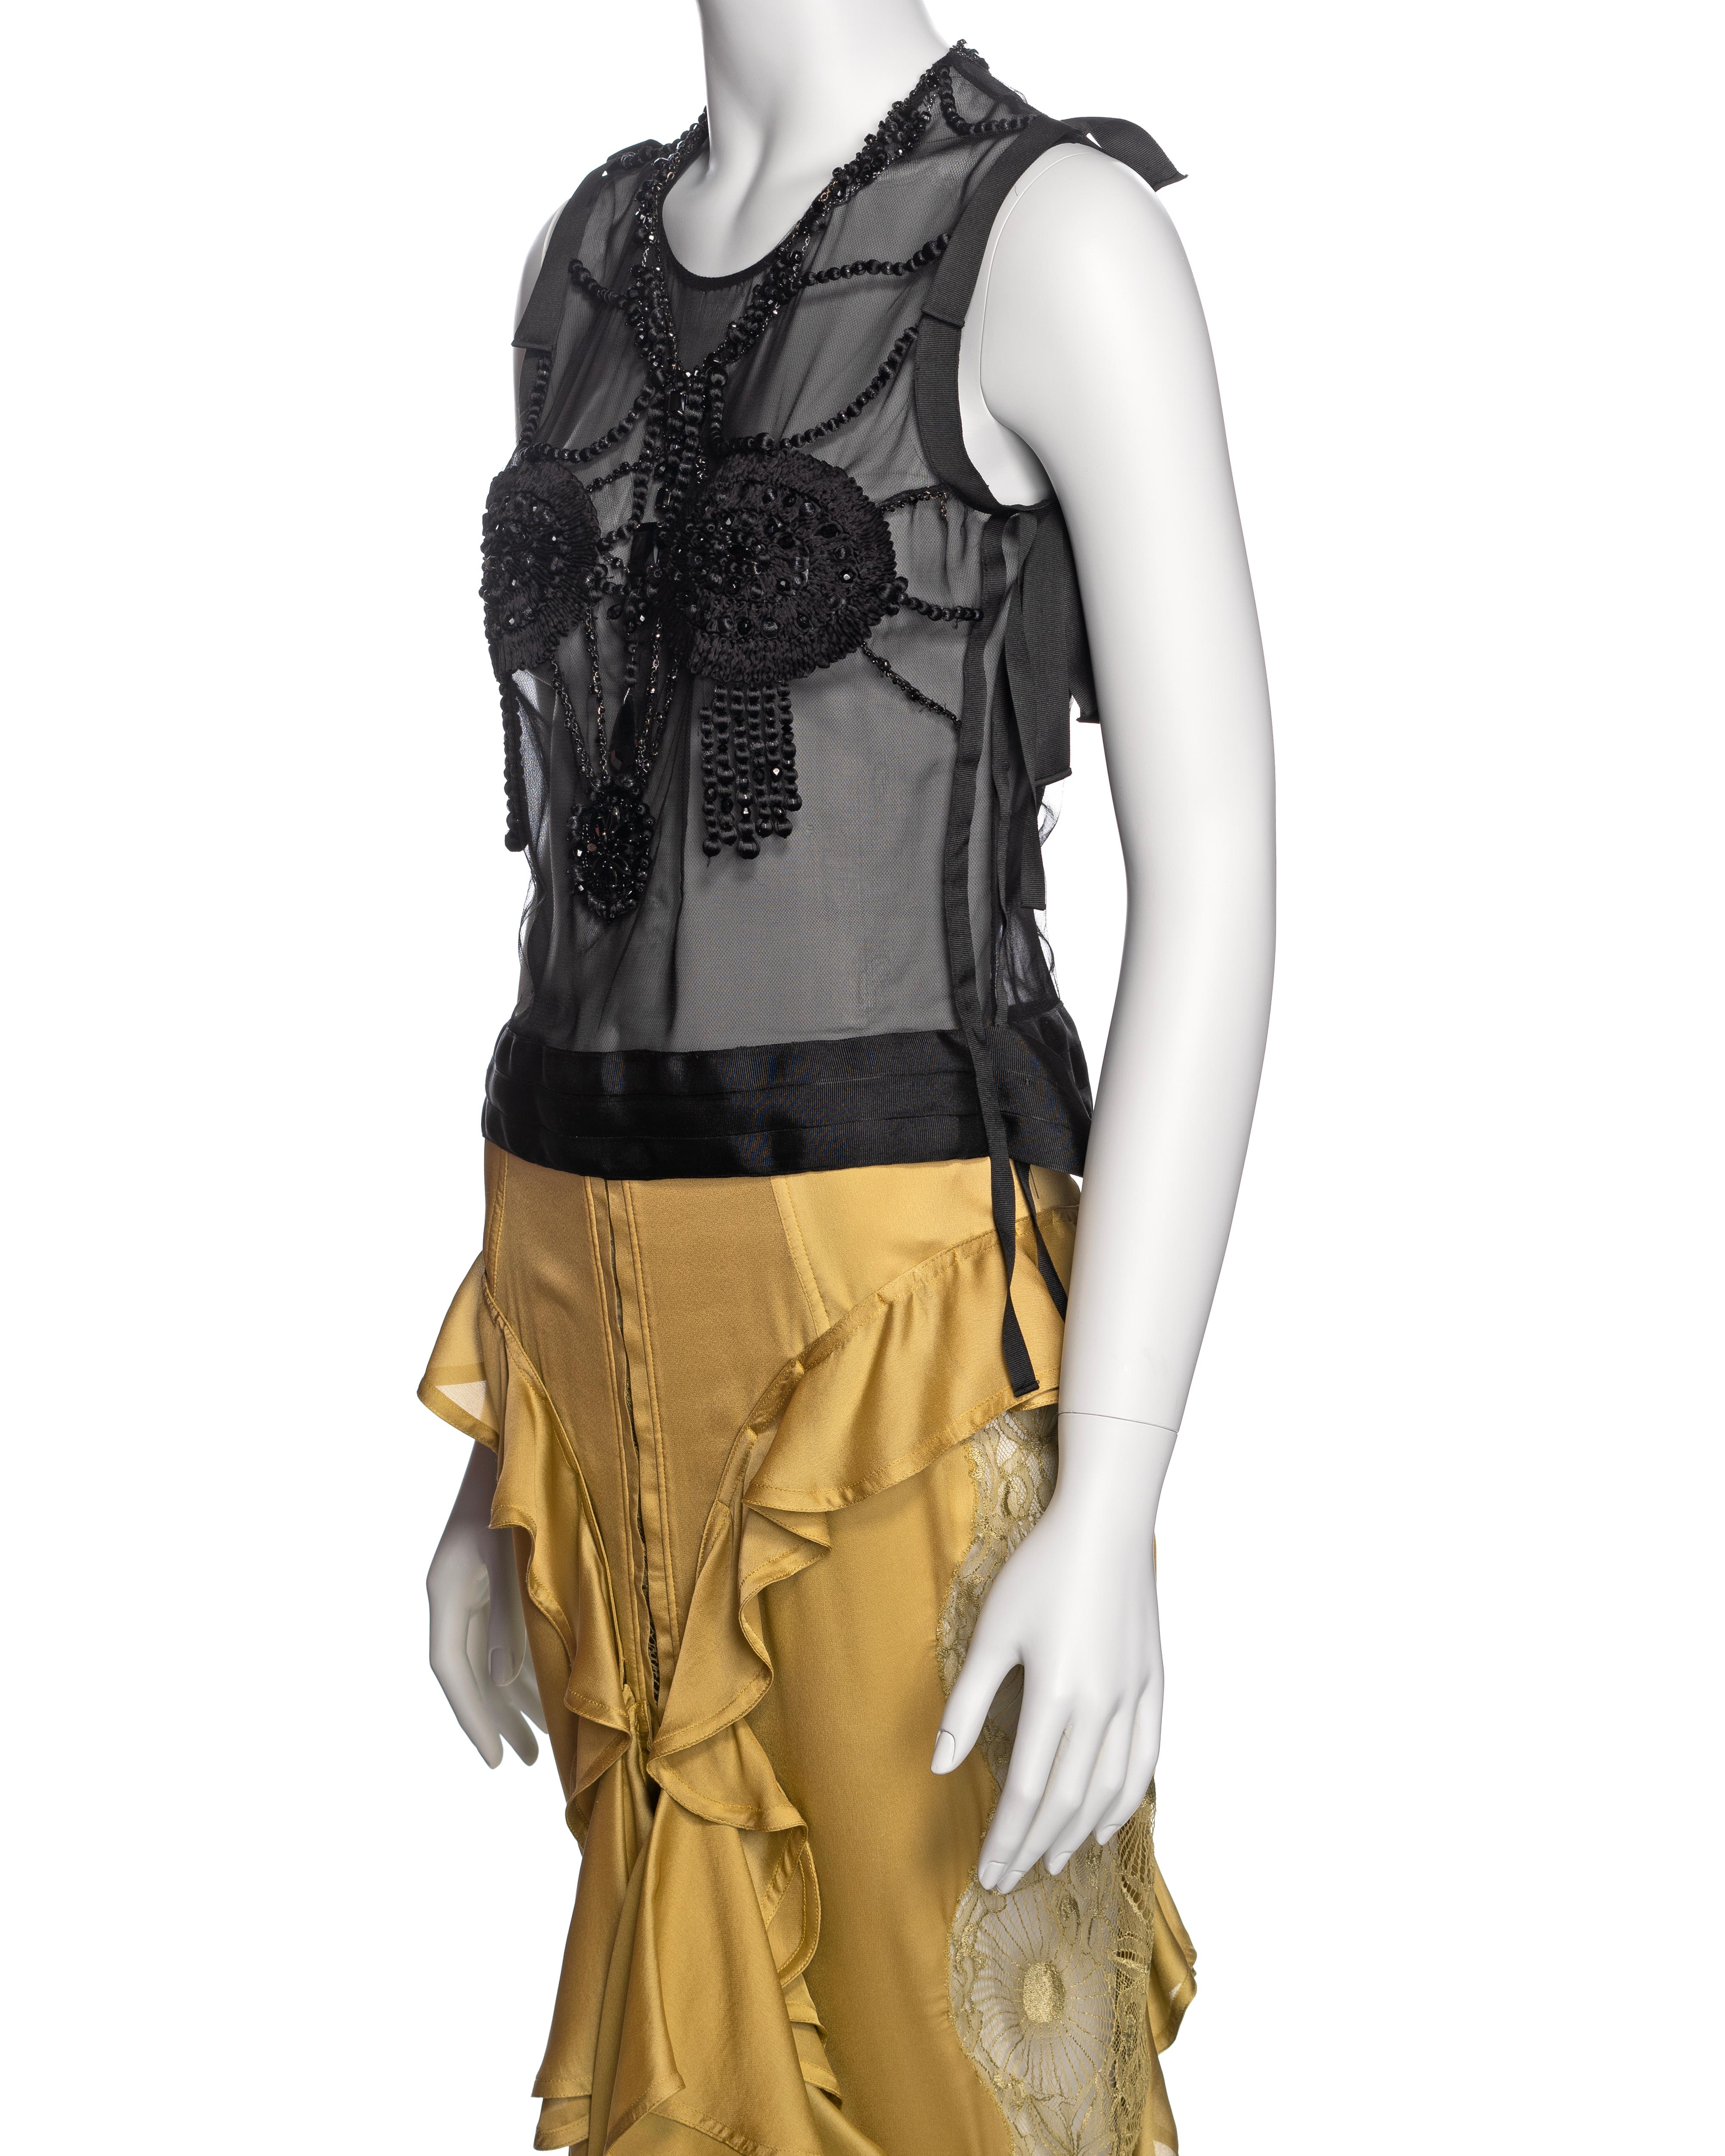 Yves Saint Laurent by Tom Ford Embellished Top and Silk Skirt Ensemble, FW 2003 For Sale 11